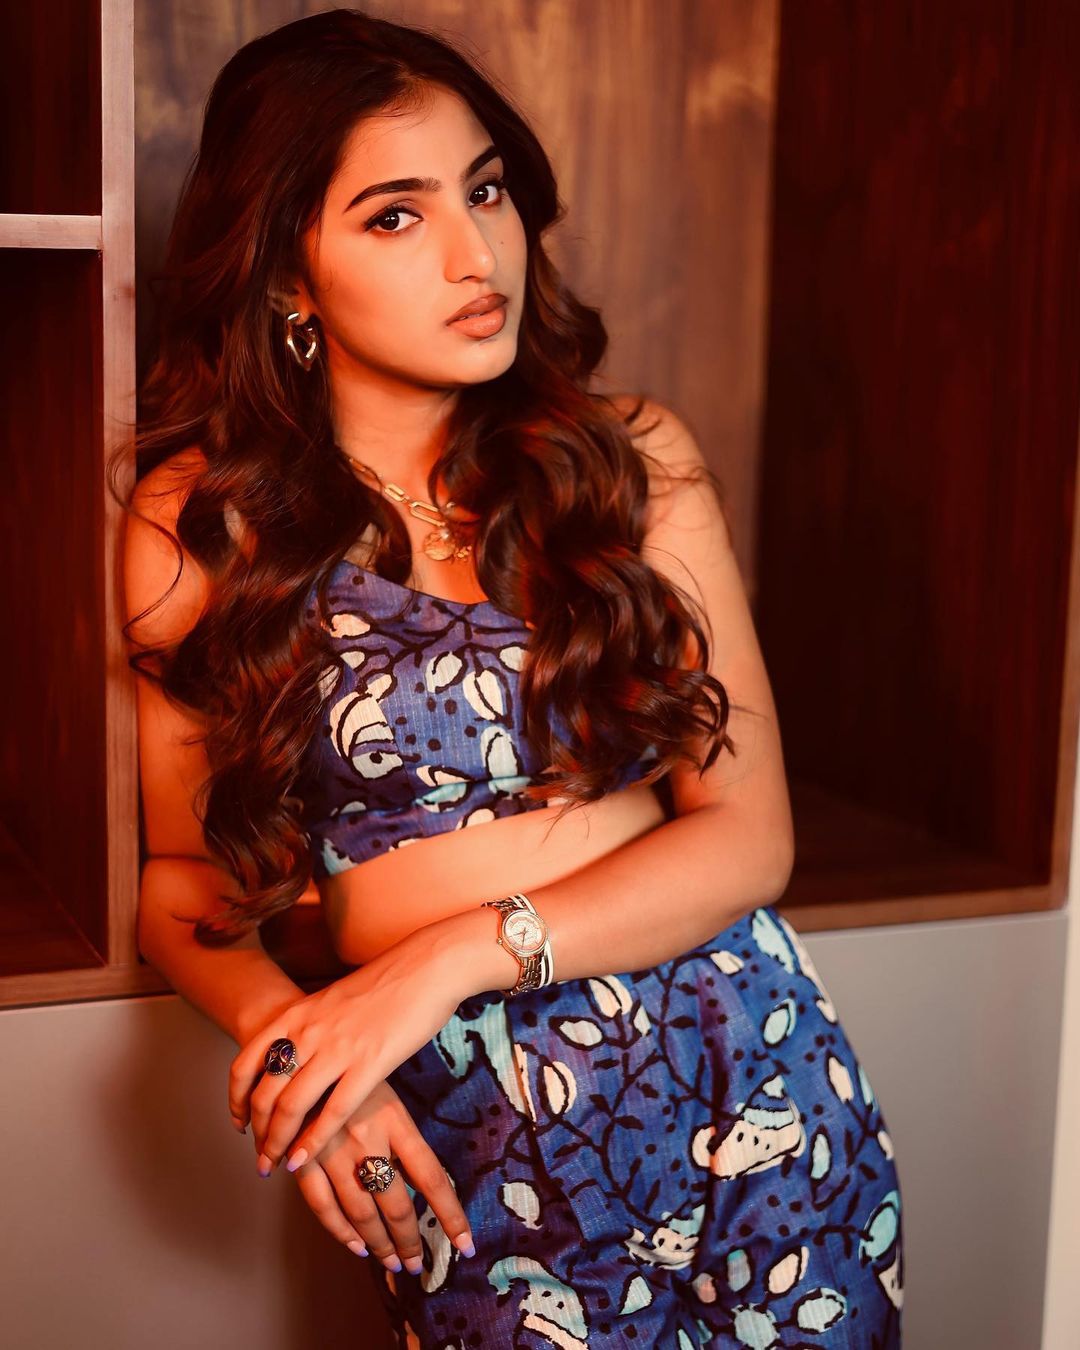 Actress pranavi manukonda melts our hearts with fashion looks-Actresspranavi Photos,Spicy Hot Pics,Images,High Resolution WallPapers Download